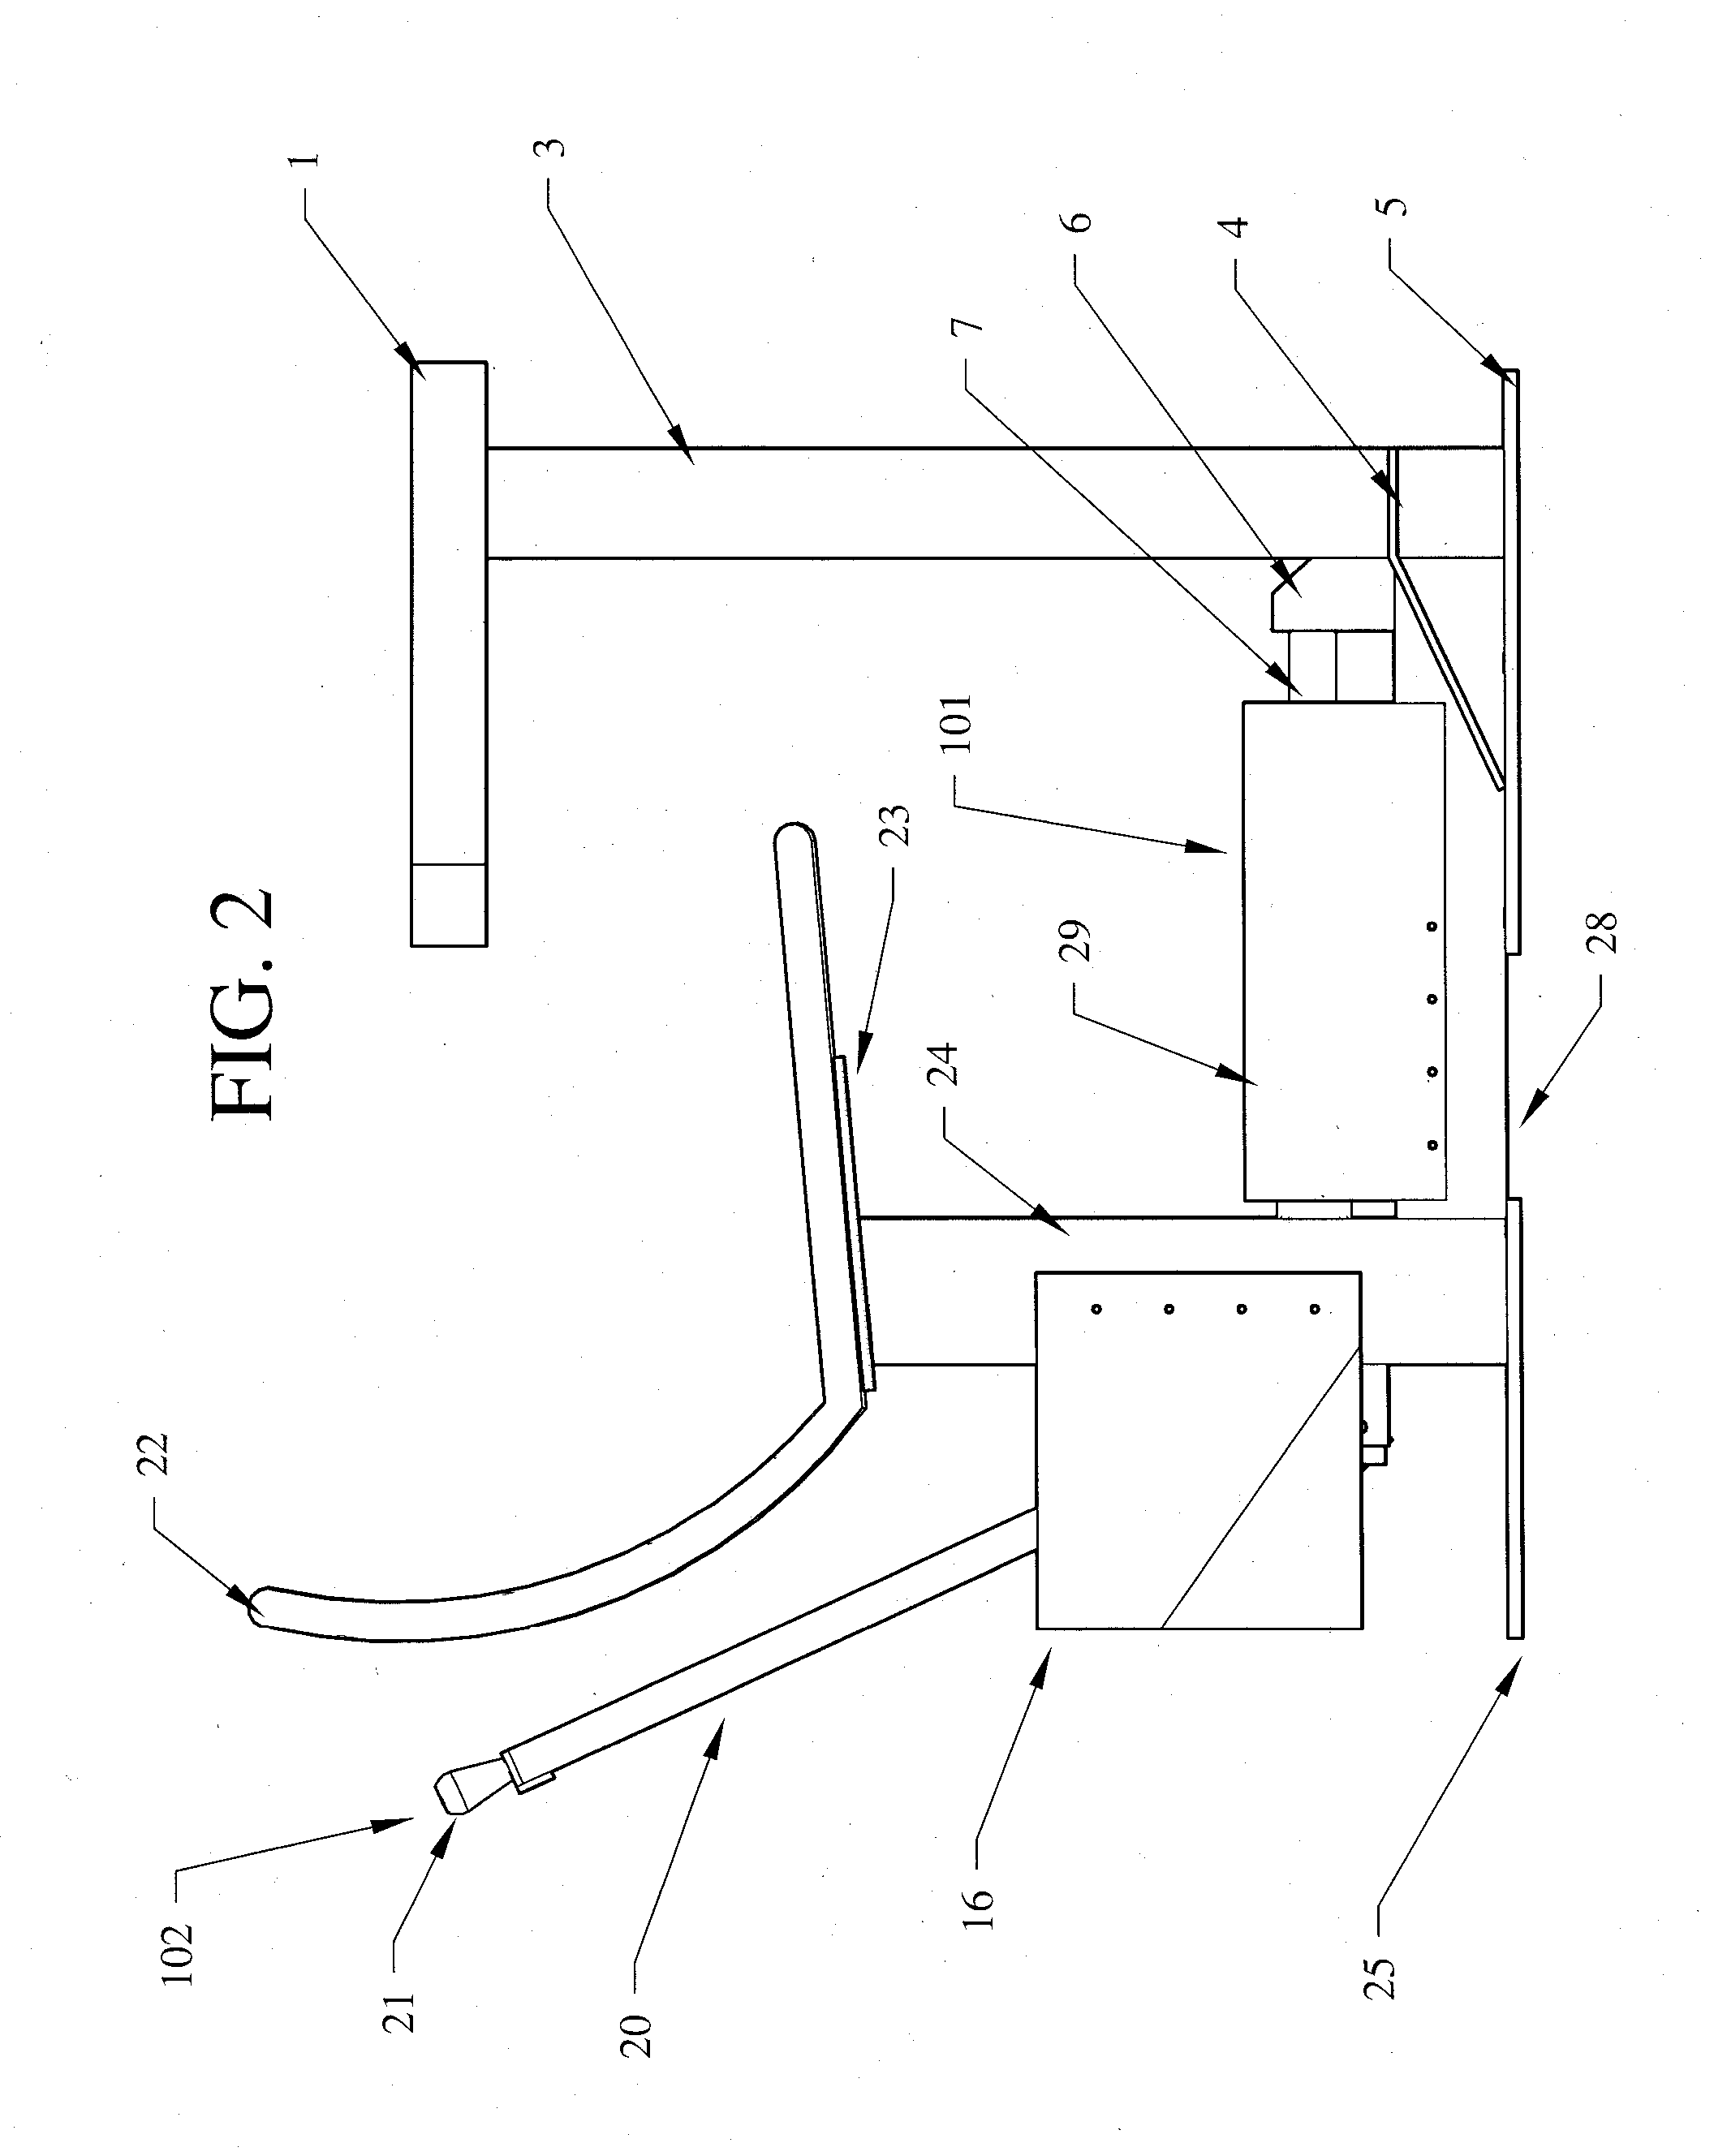 Table and seat restraint apparatus